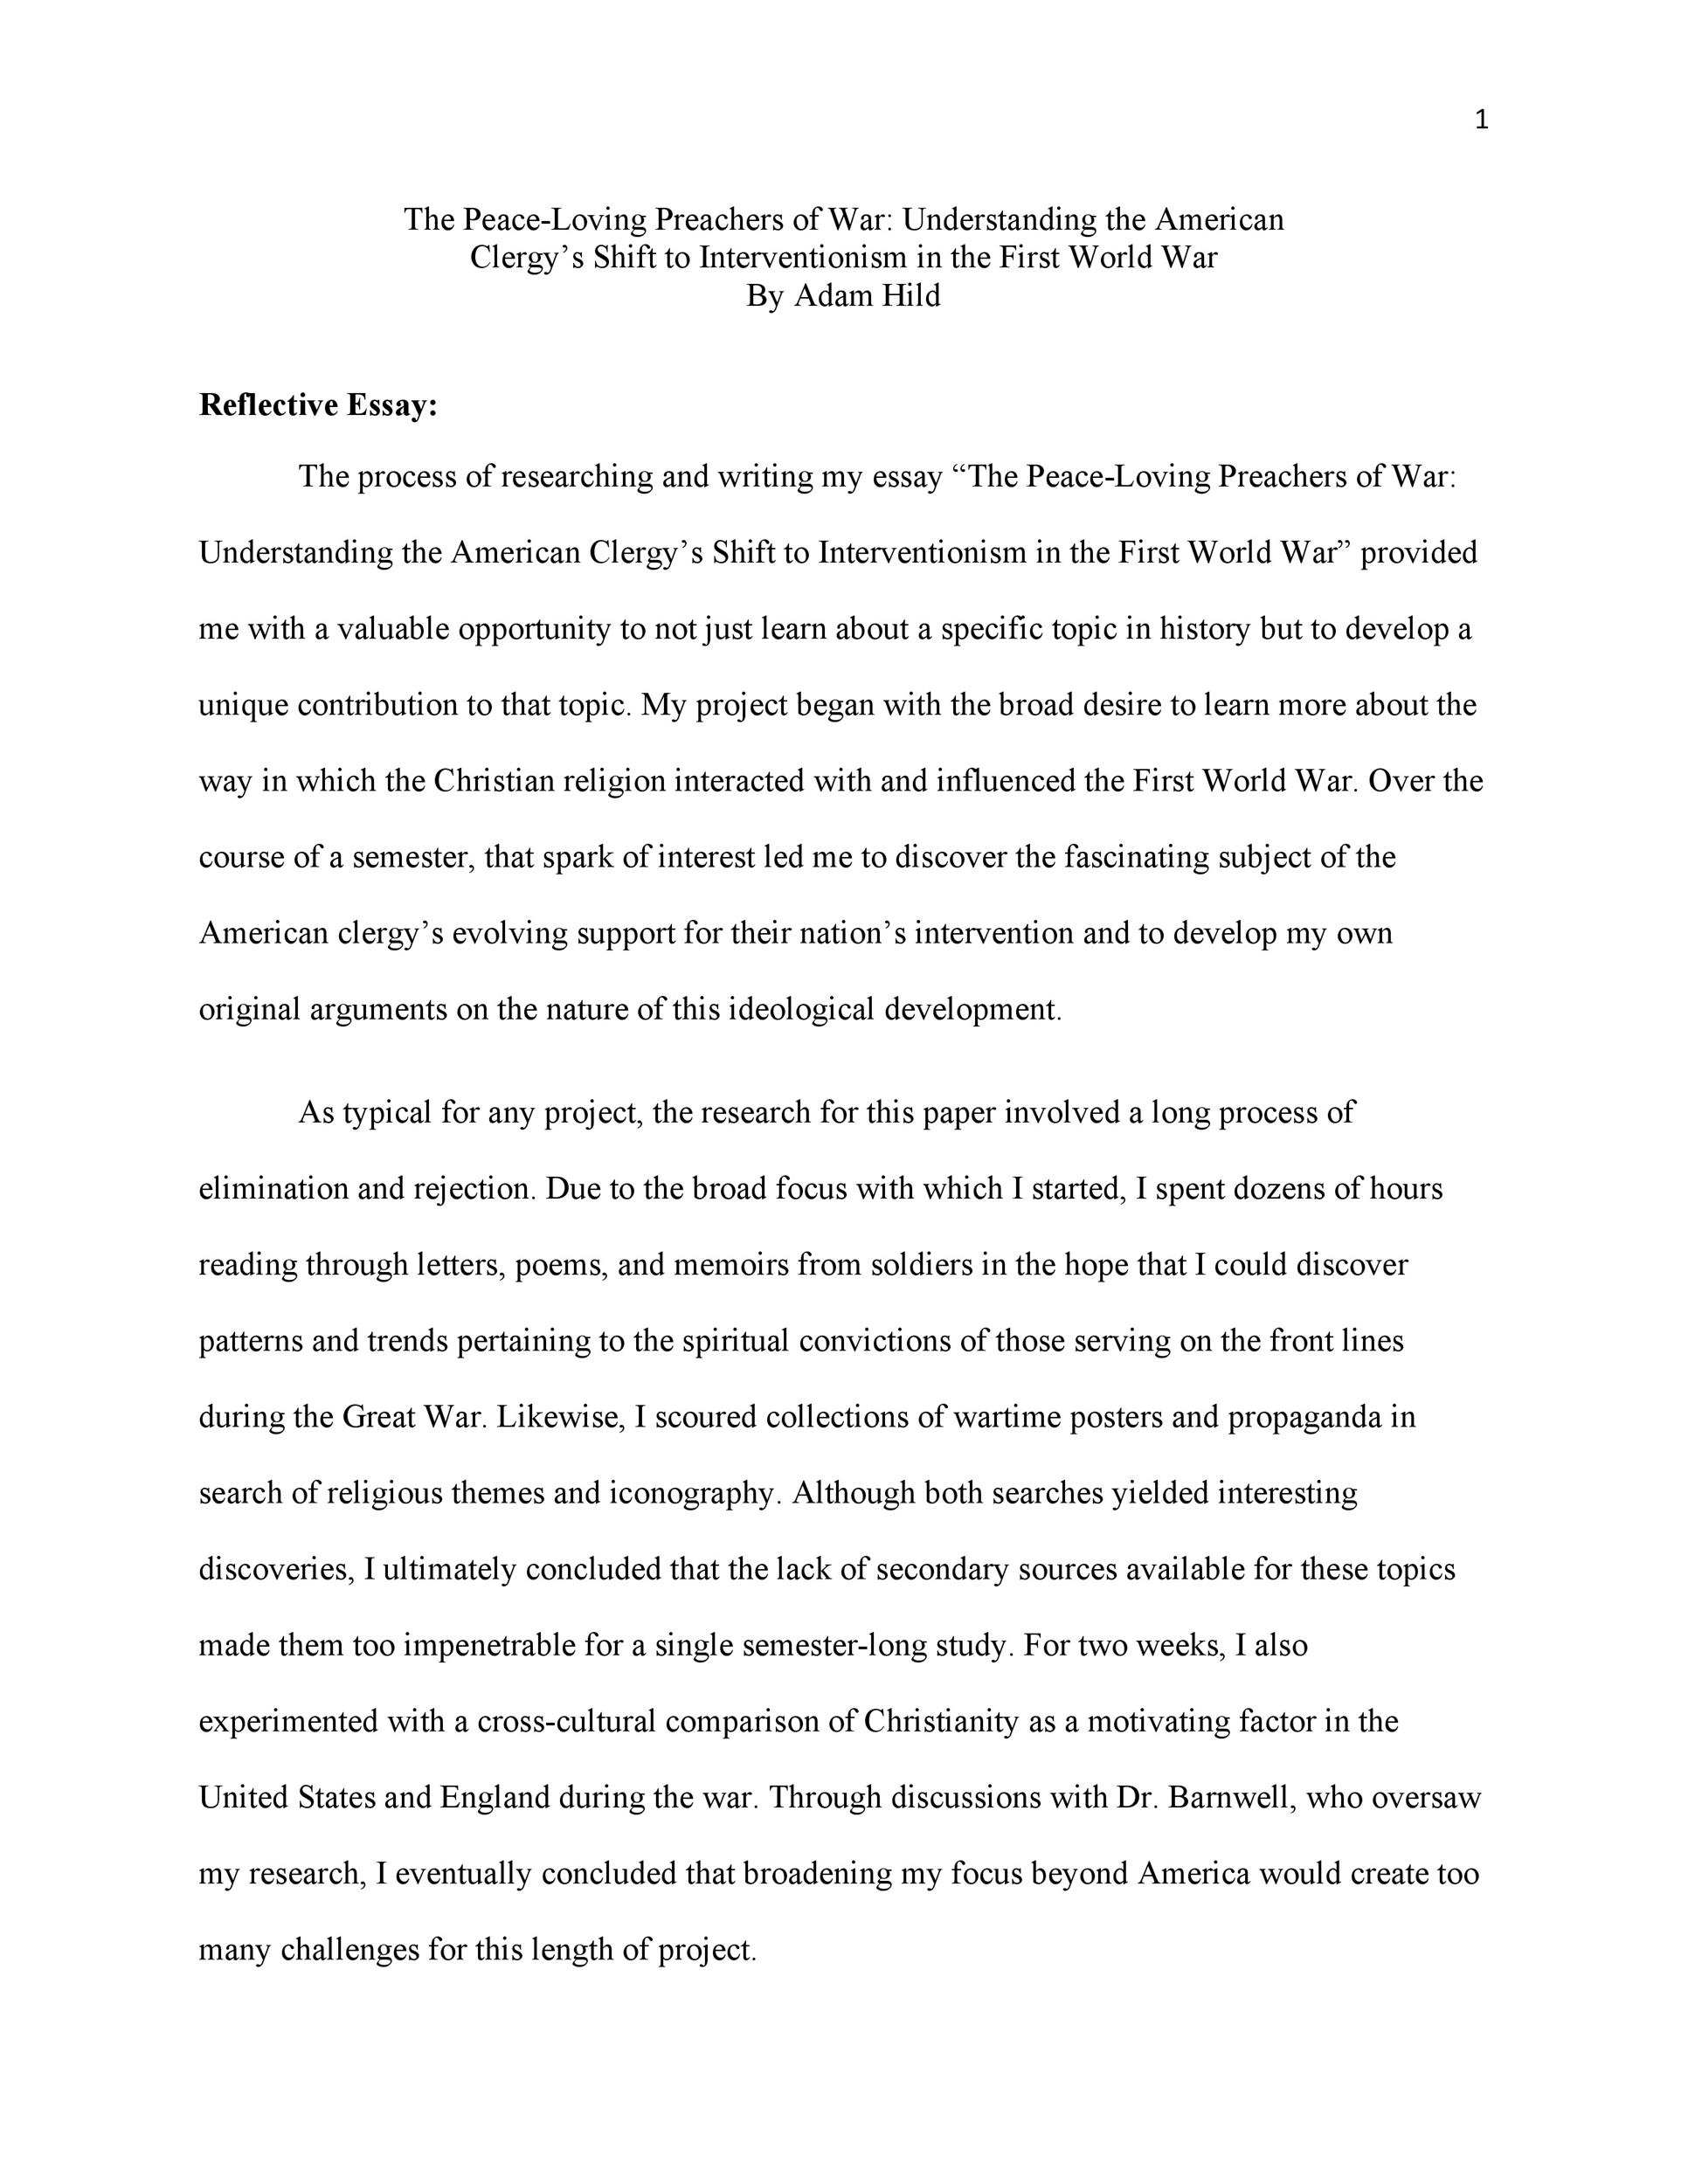 reflective essay thesis statement examples